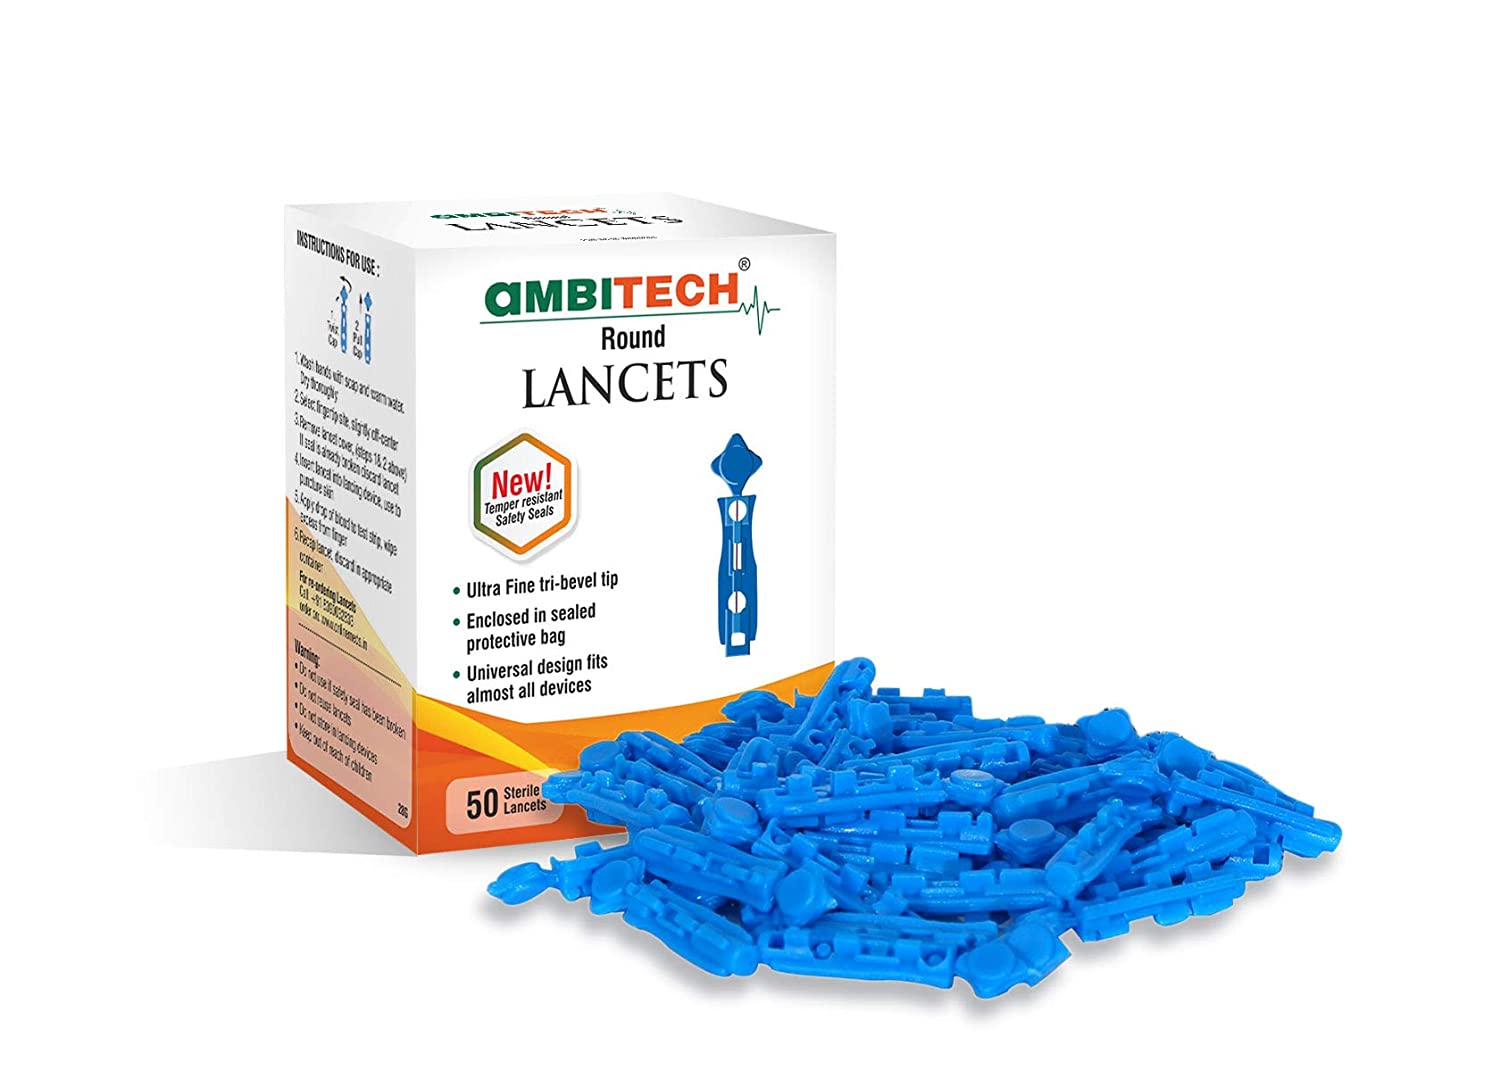 DR. MOREPEN BG-03 25 Test Strips with Ambitech 50 Round Lancets Combo (No Glucometer)